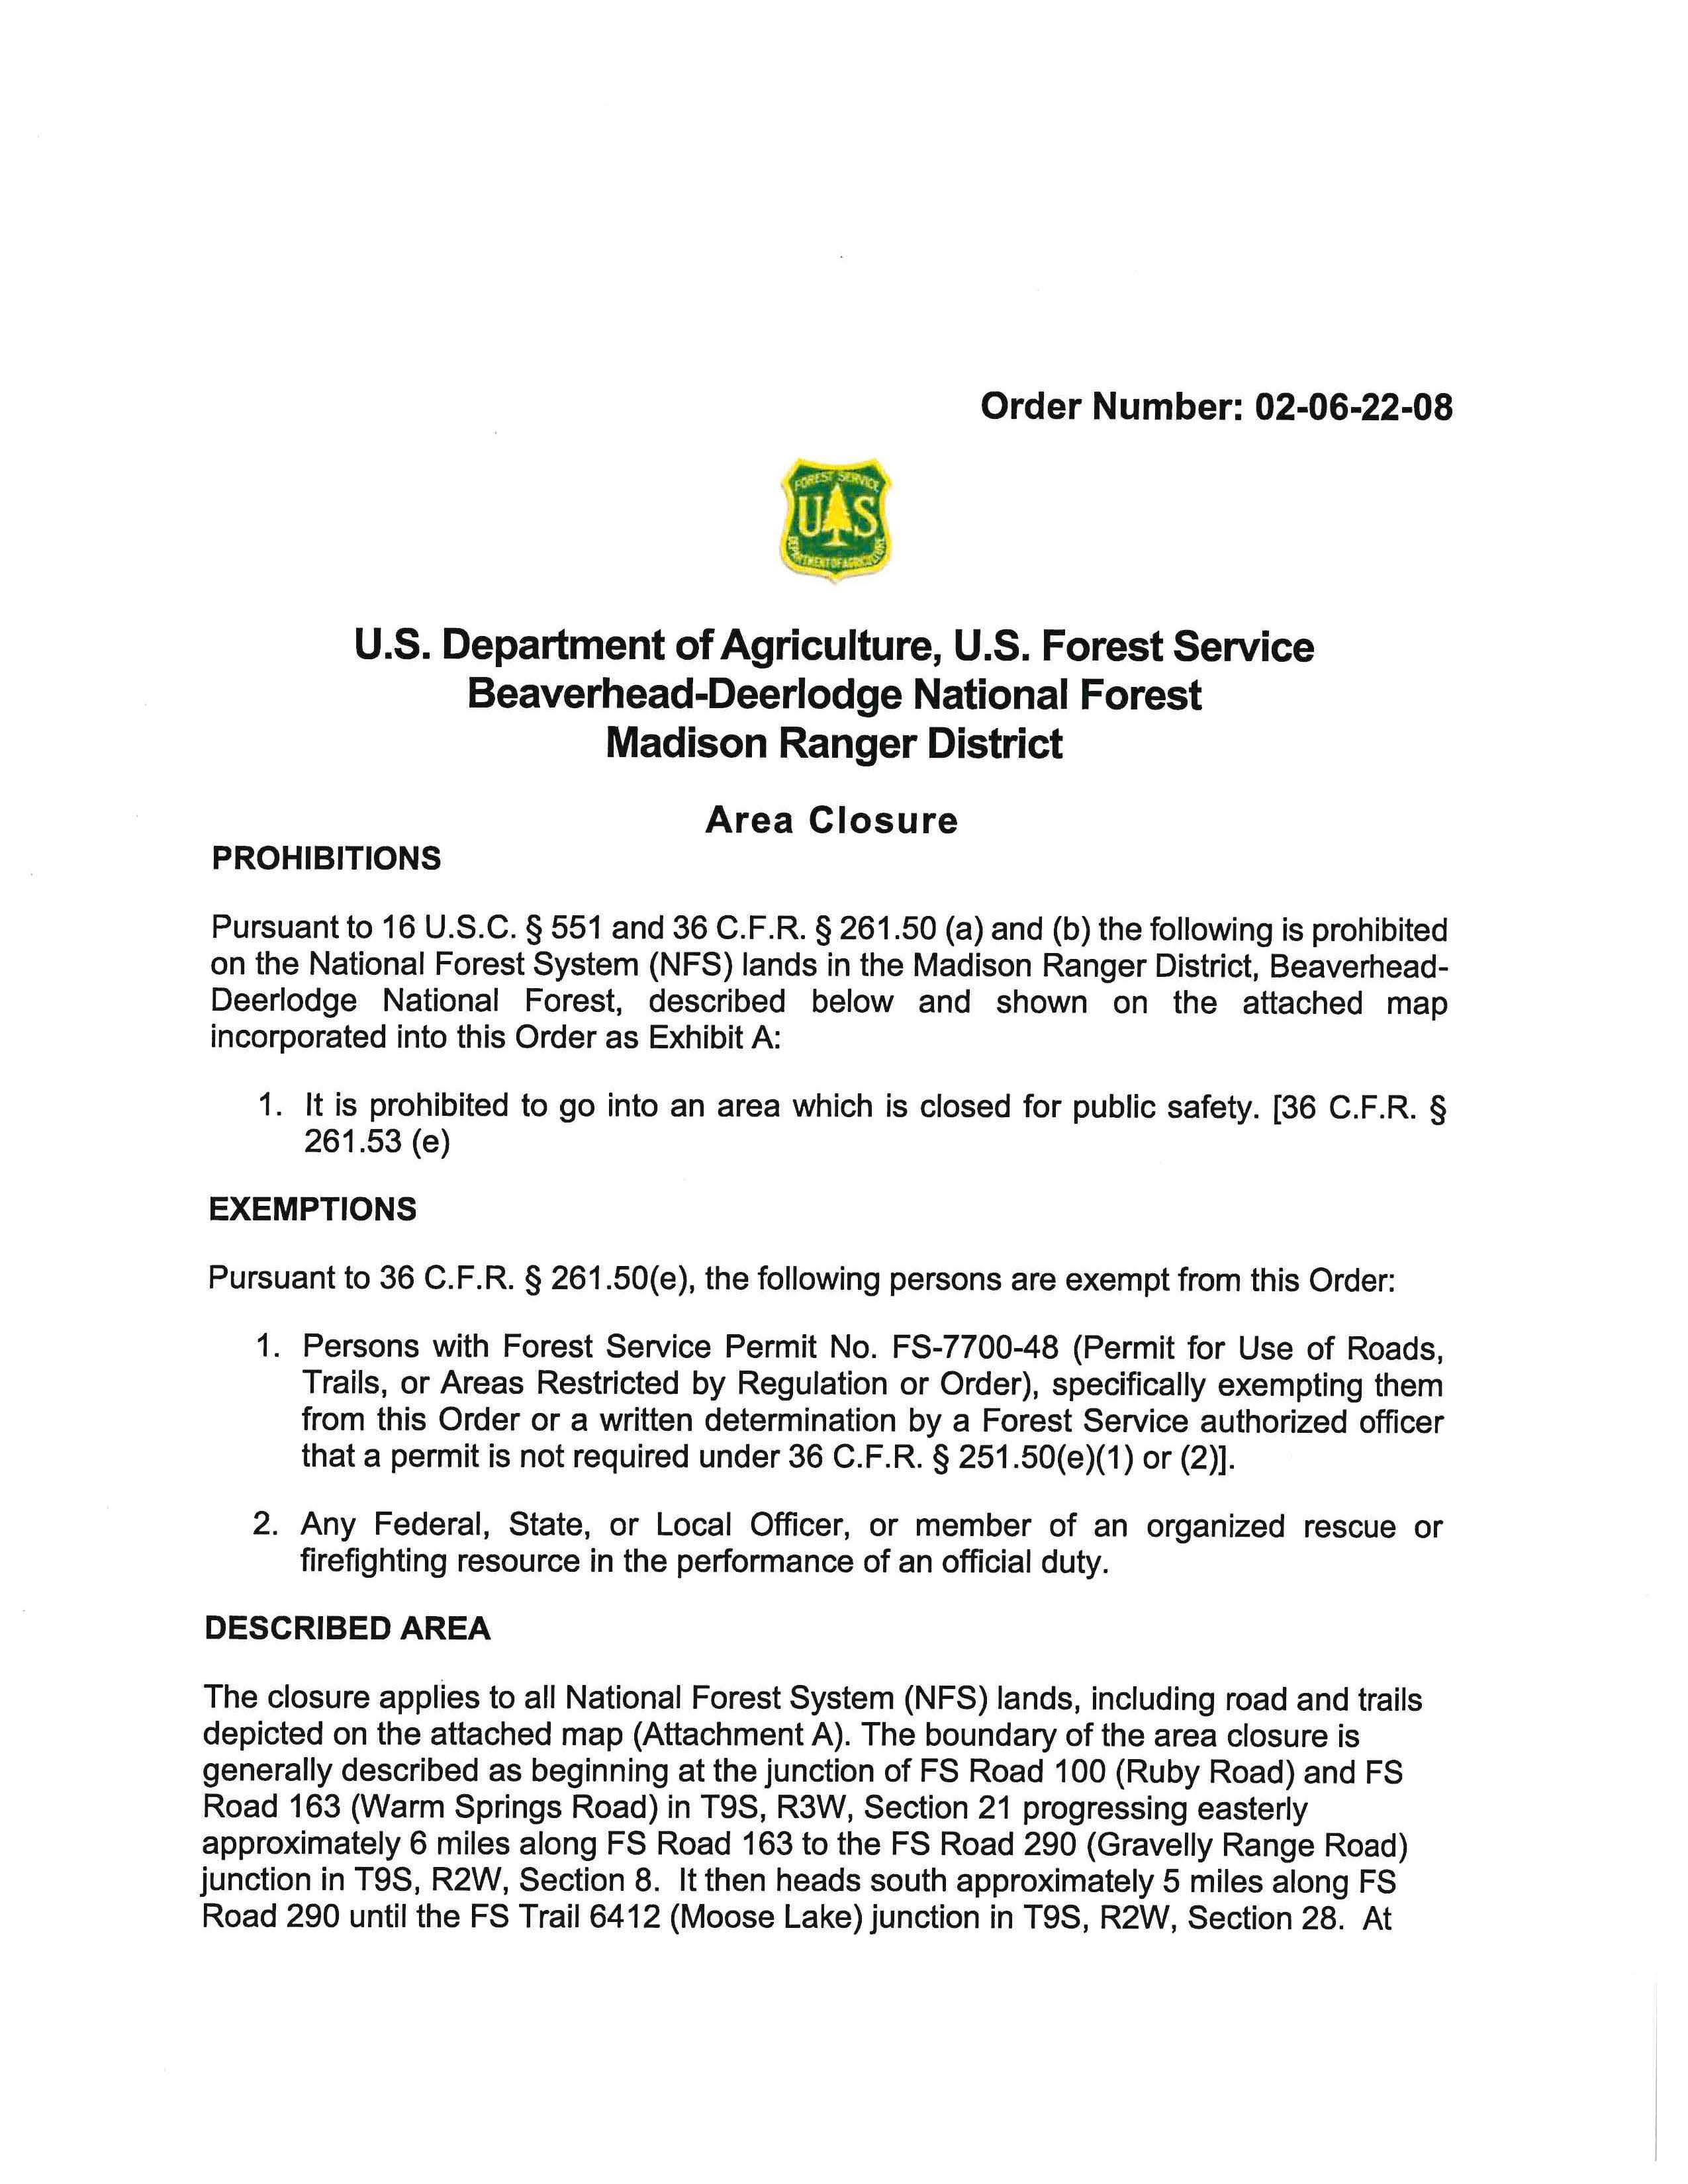 Area Closure Order for Clover Fire, page 1